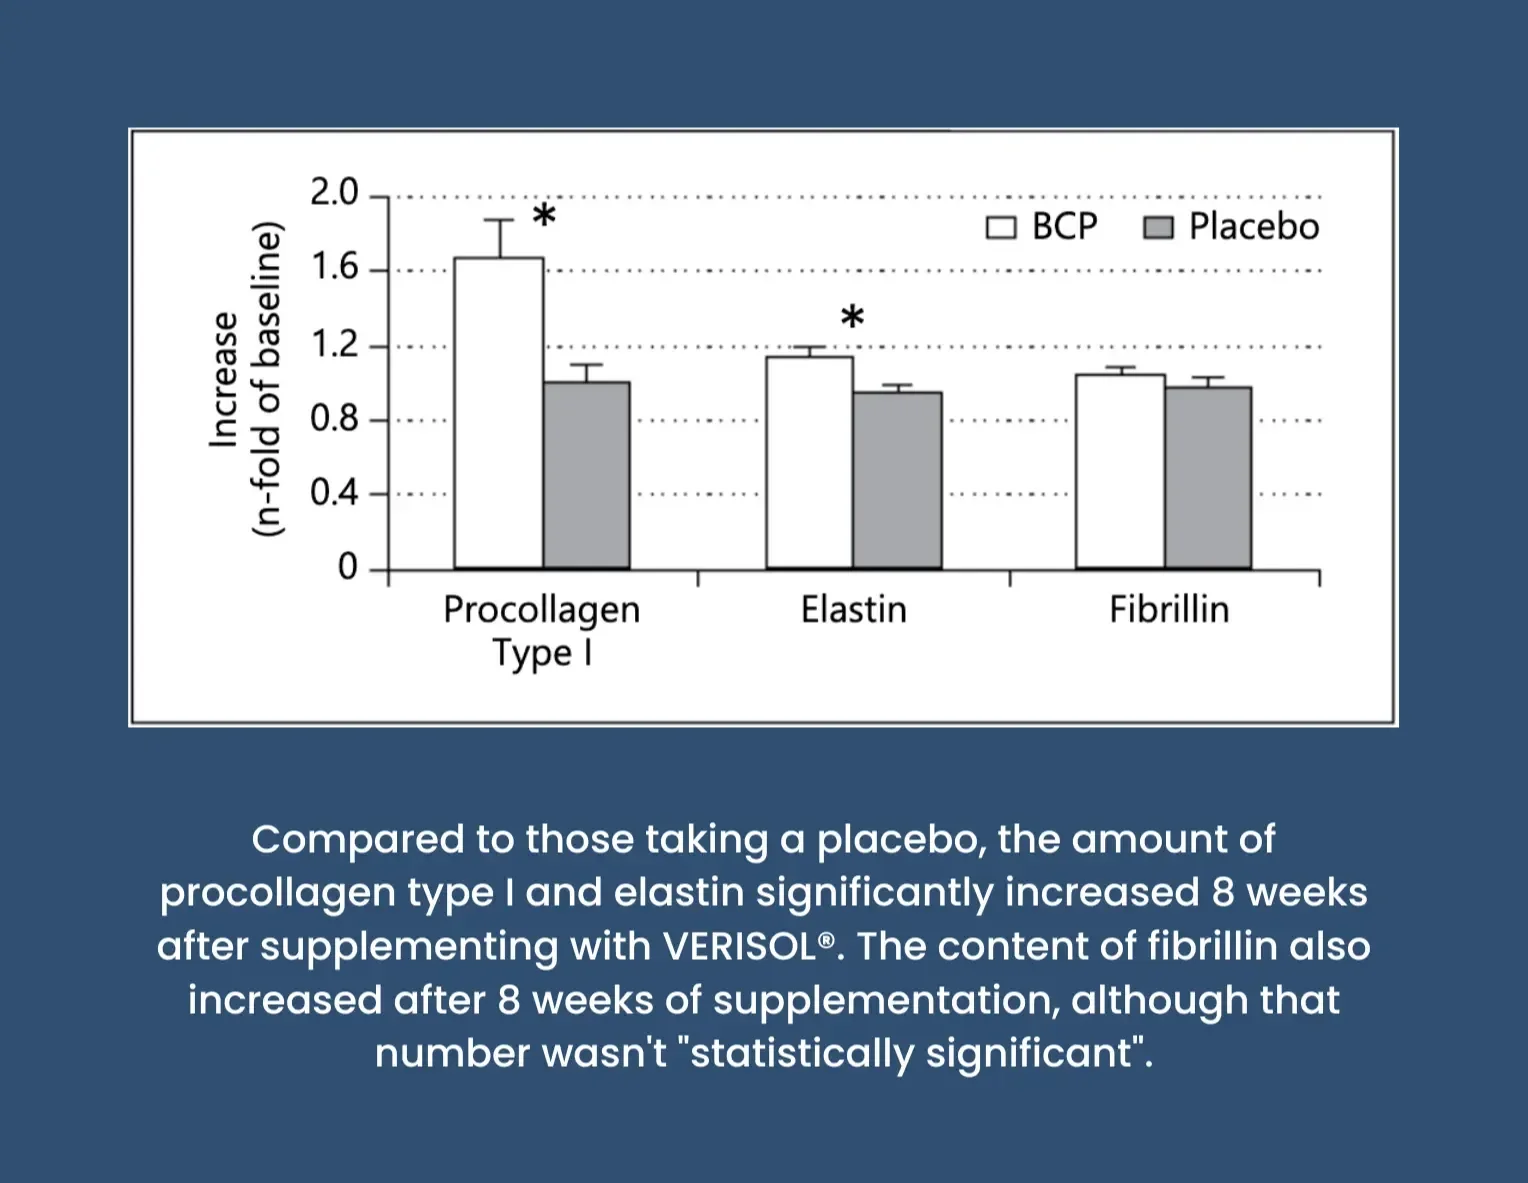 Line chart showing the increase of procollagen type I, elastin, and fibrillin after 8 weeks of supplementing with either VERISOL® or a placebo daily.